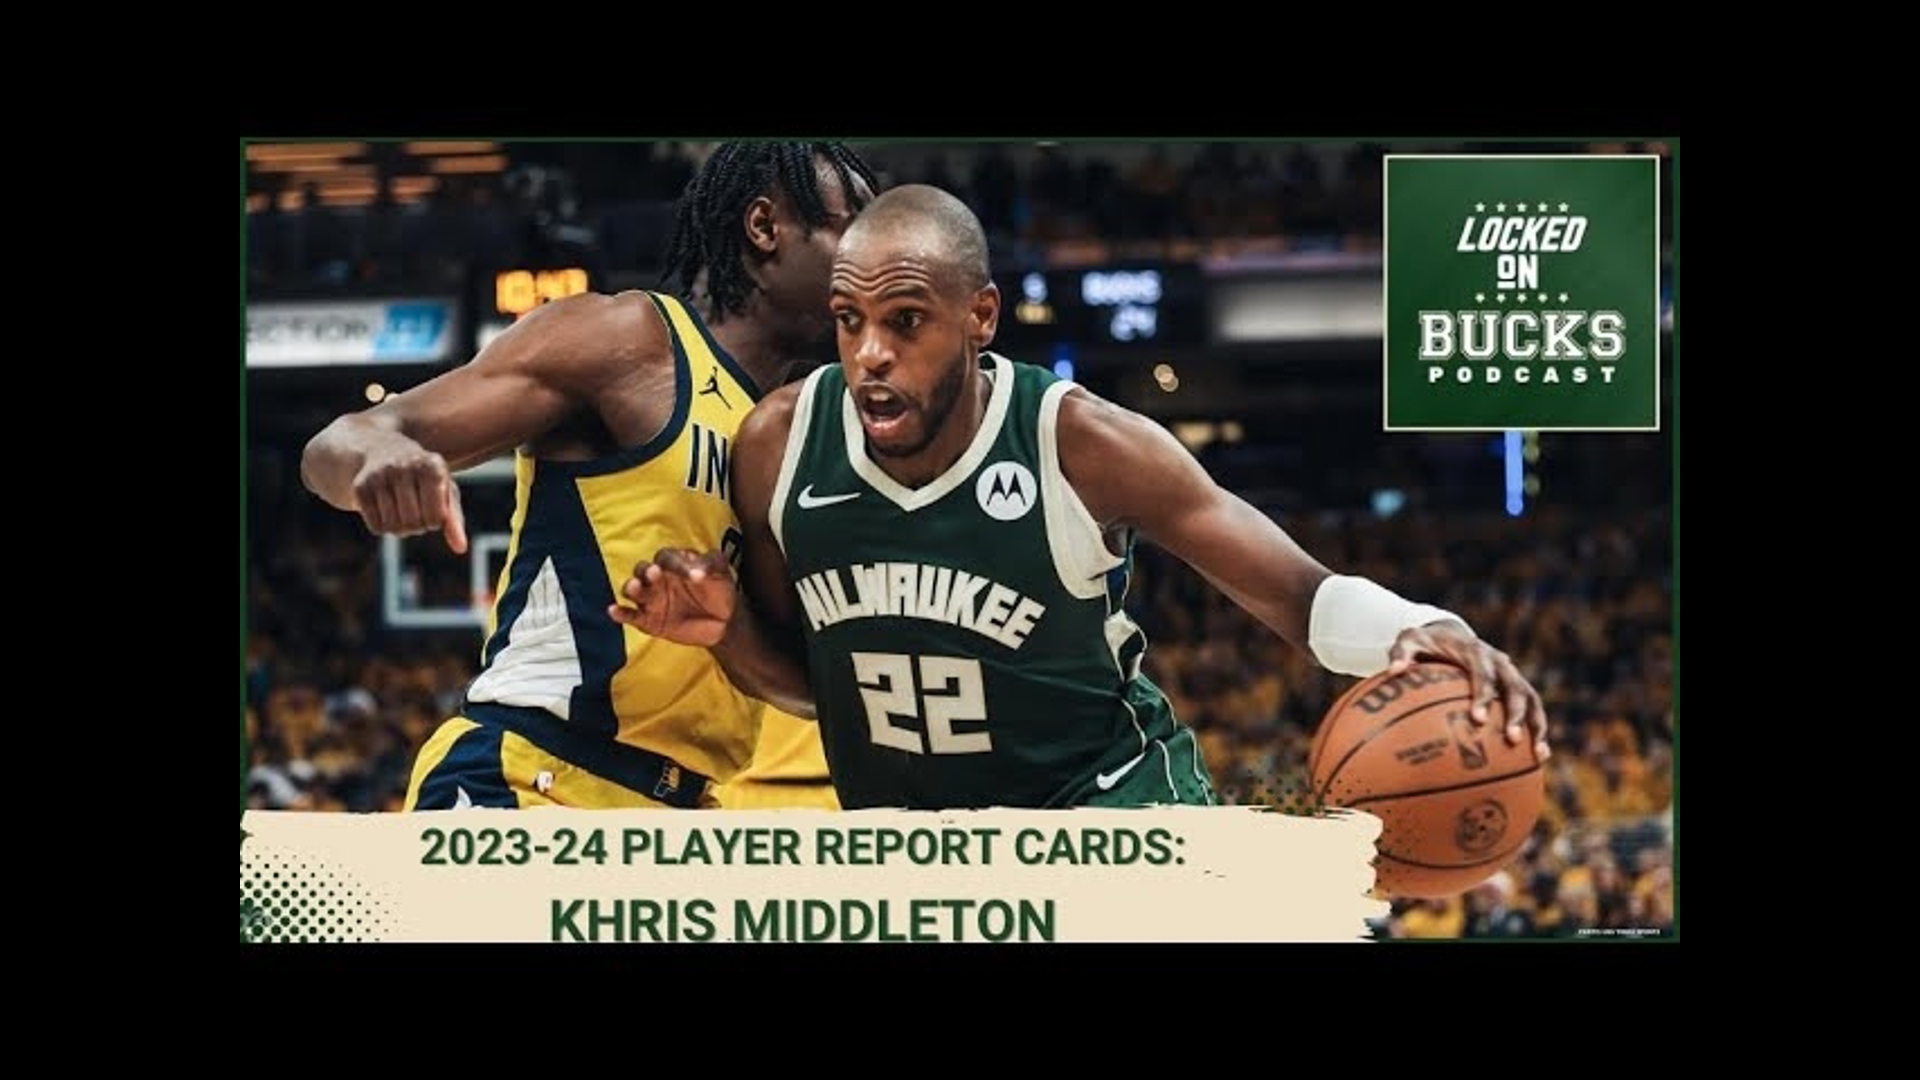 Justin and Camille continue their tour of 2023-24 performances with a look back at Khris Middleton.